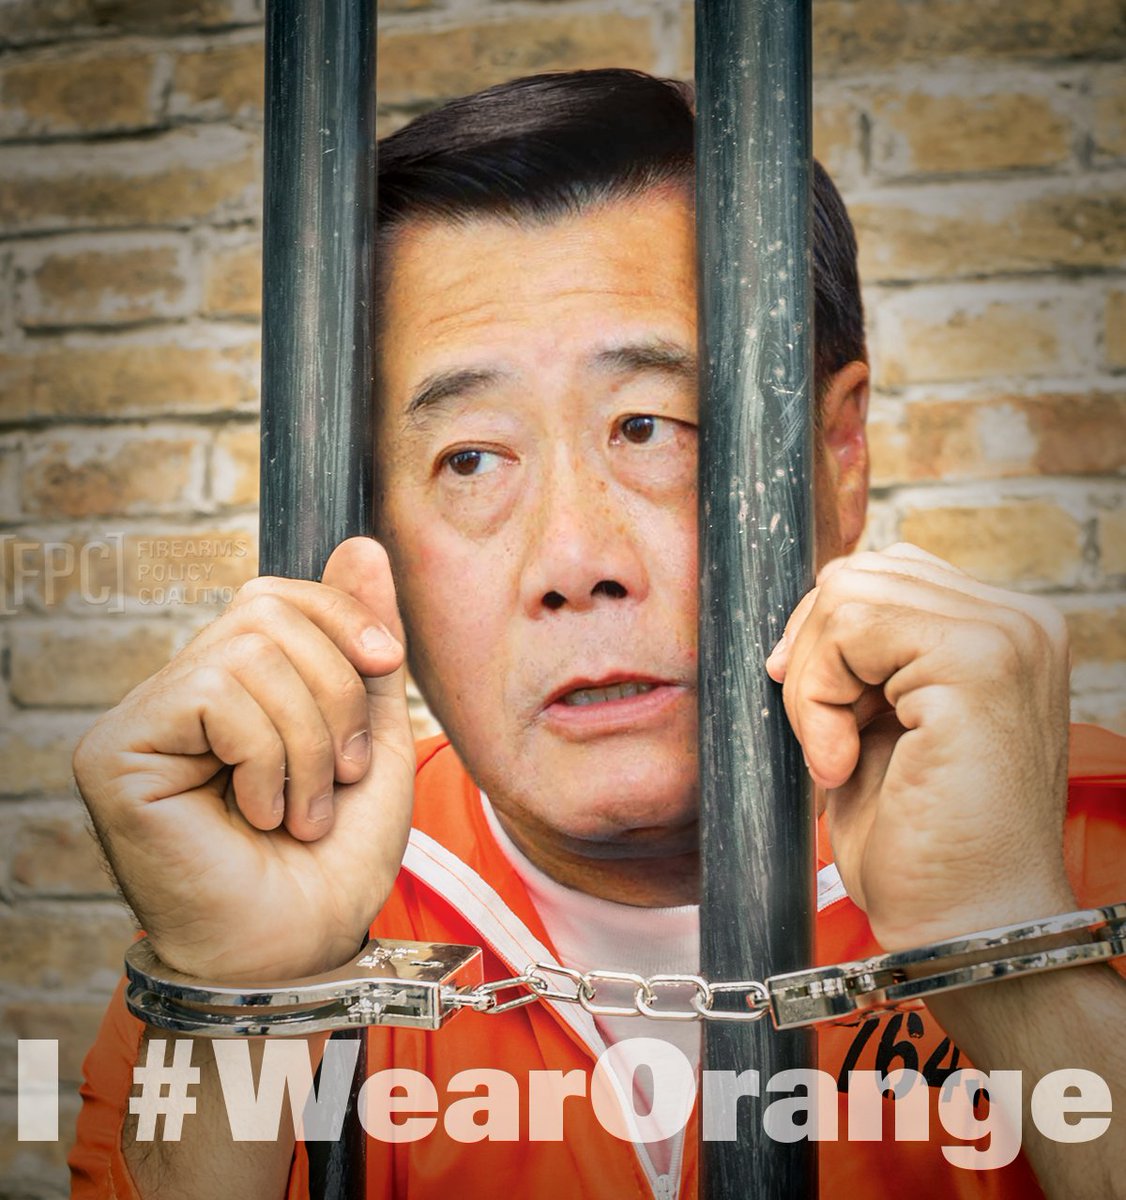 First up is one of our go-to hypocrites: Former CA State Senator @LelandYee! In 2015, this advocate of 'assault weapon' bans admitted to conspiring to import automatic weapons into New Jersey from the Philippines. On this #WearOrangeDay we remember YOU Uncle Leland!